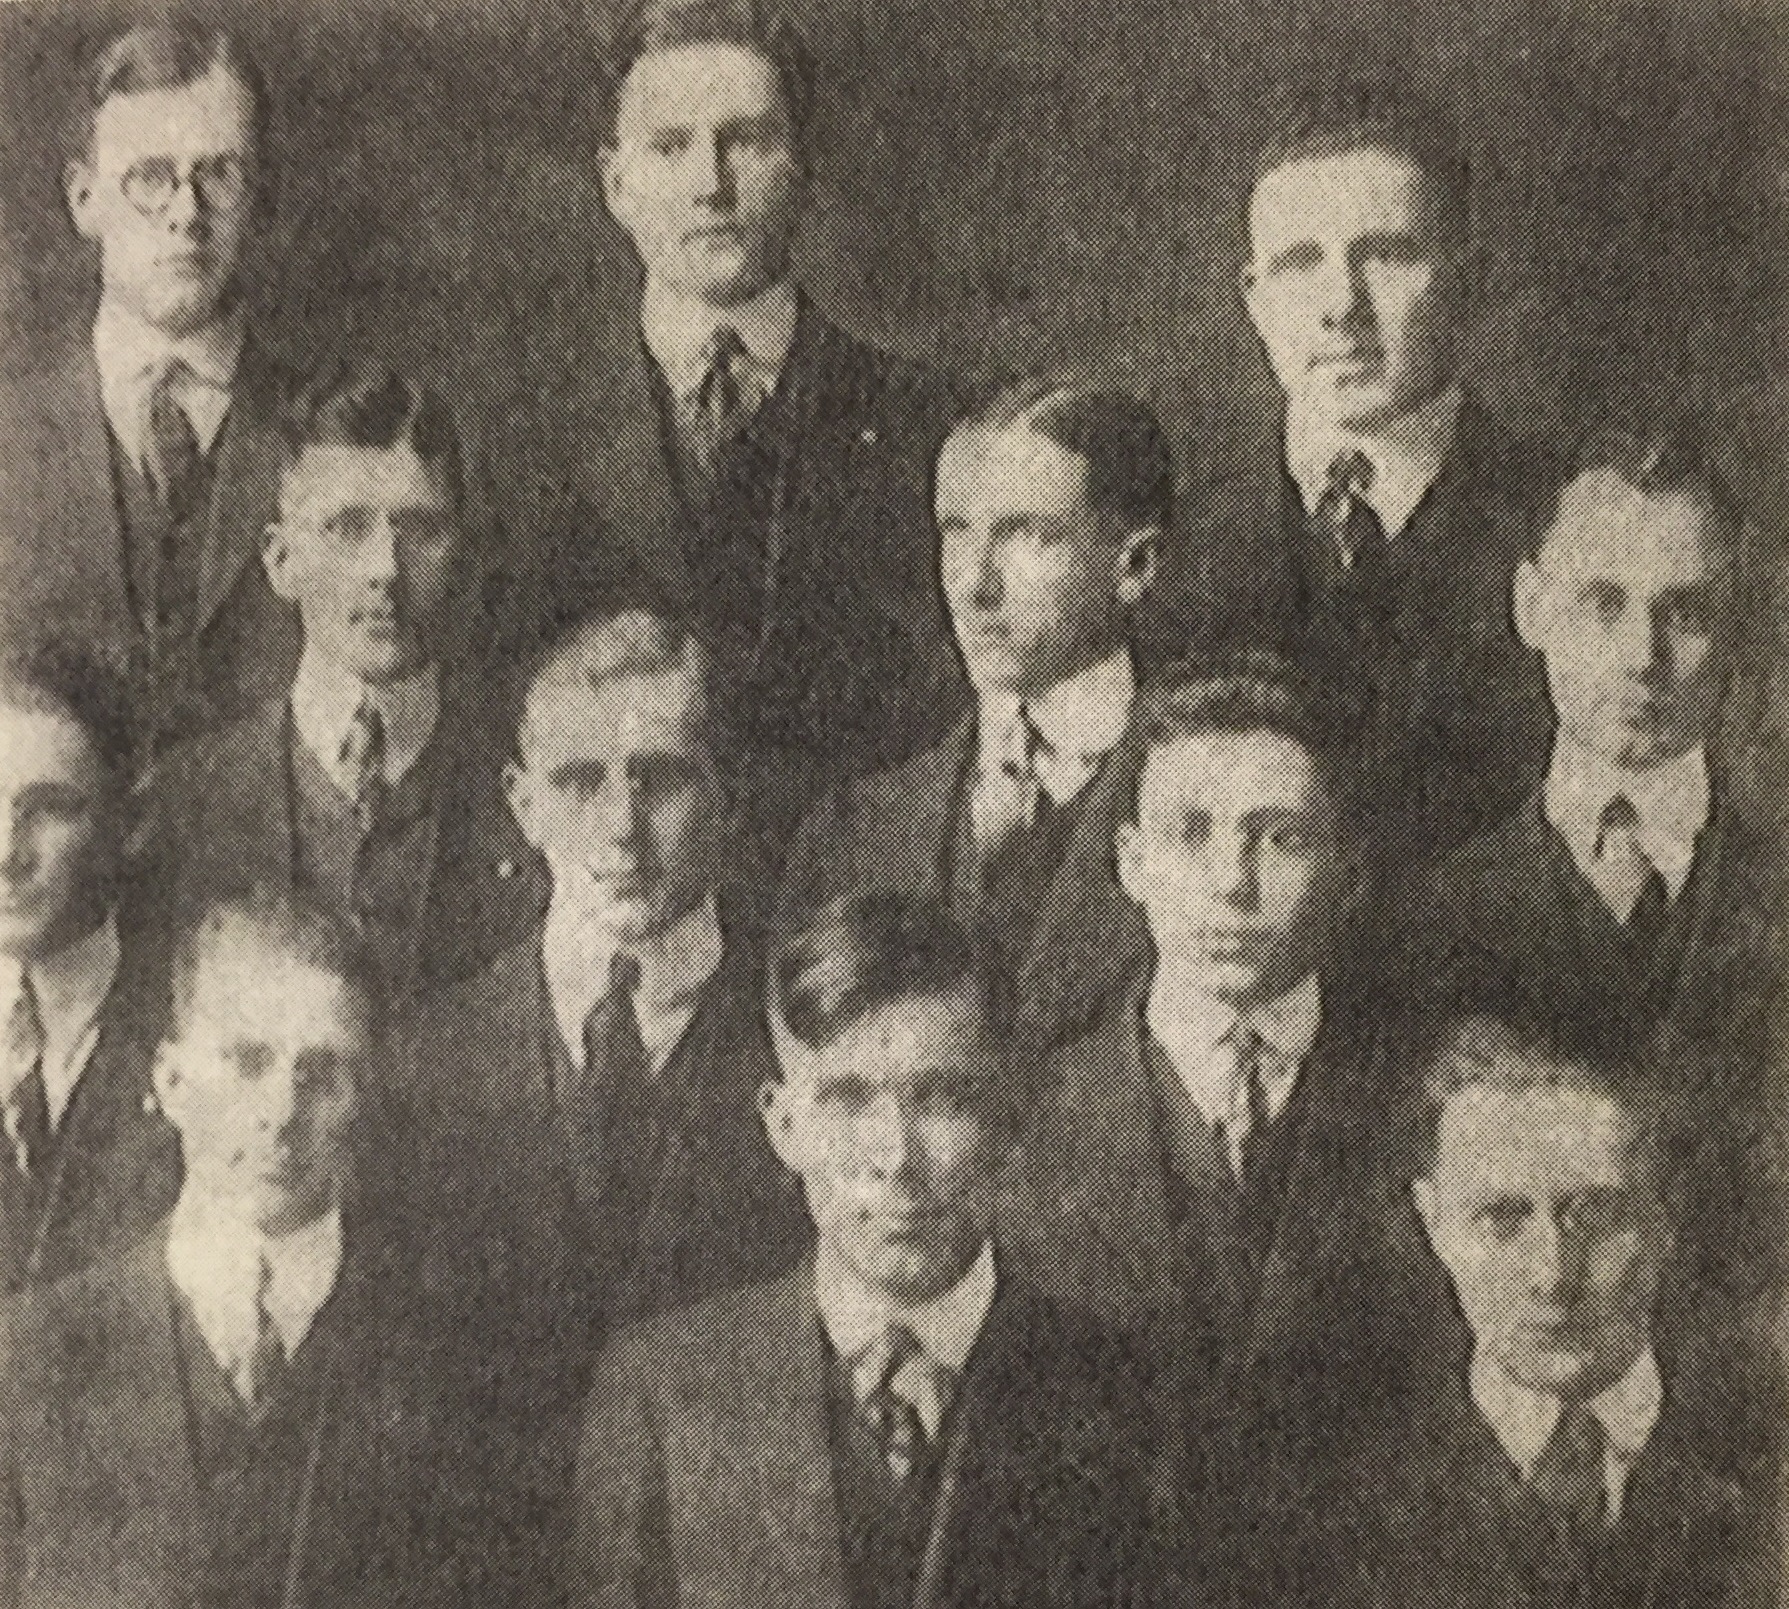 The IU Debate Team, 1916. Willkie is front row, center. Image courtesy of Indiana University, Bloomington.